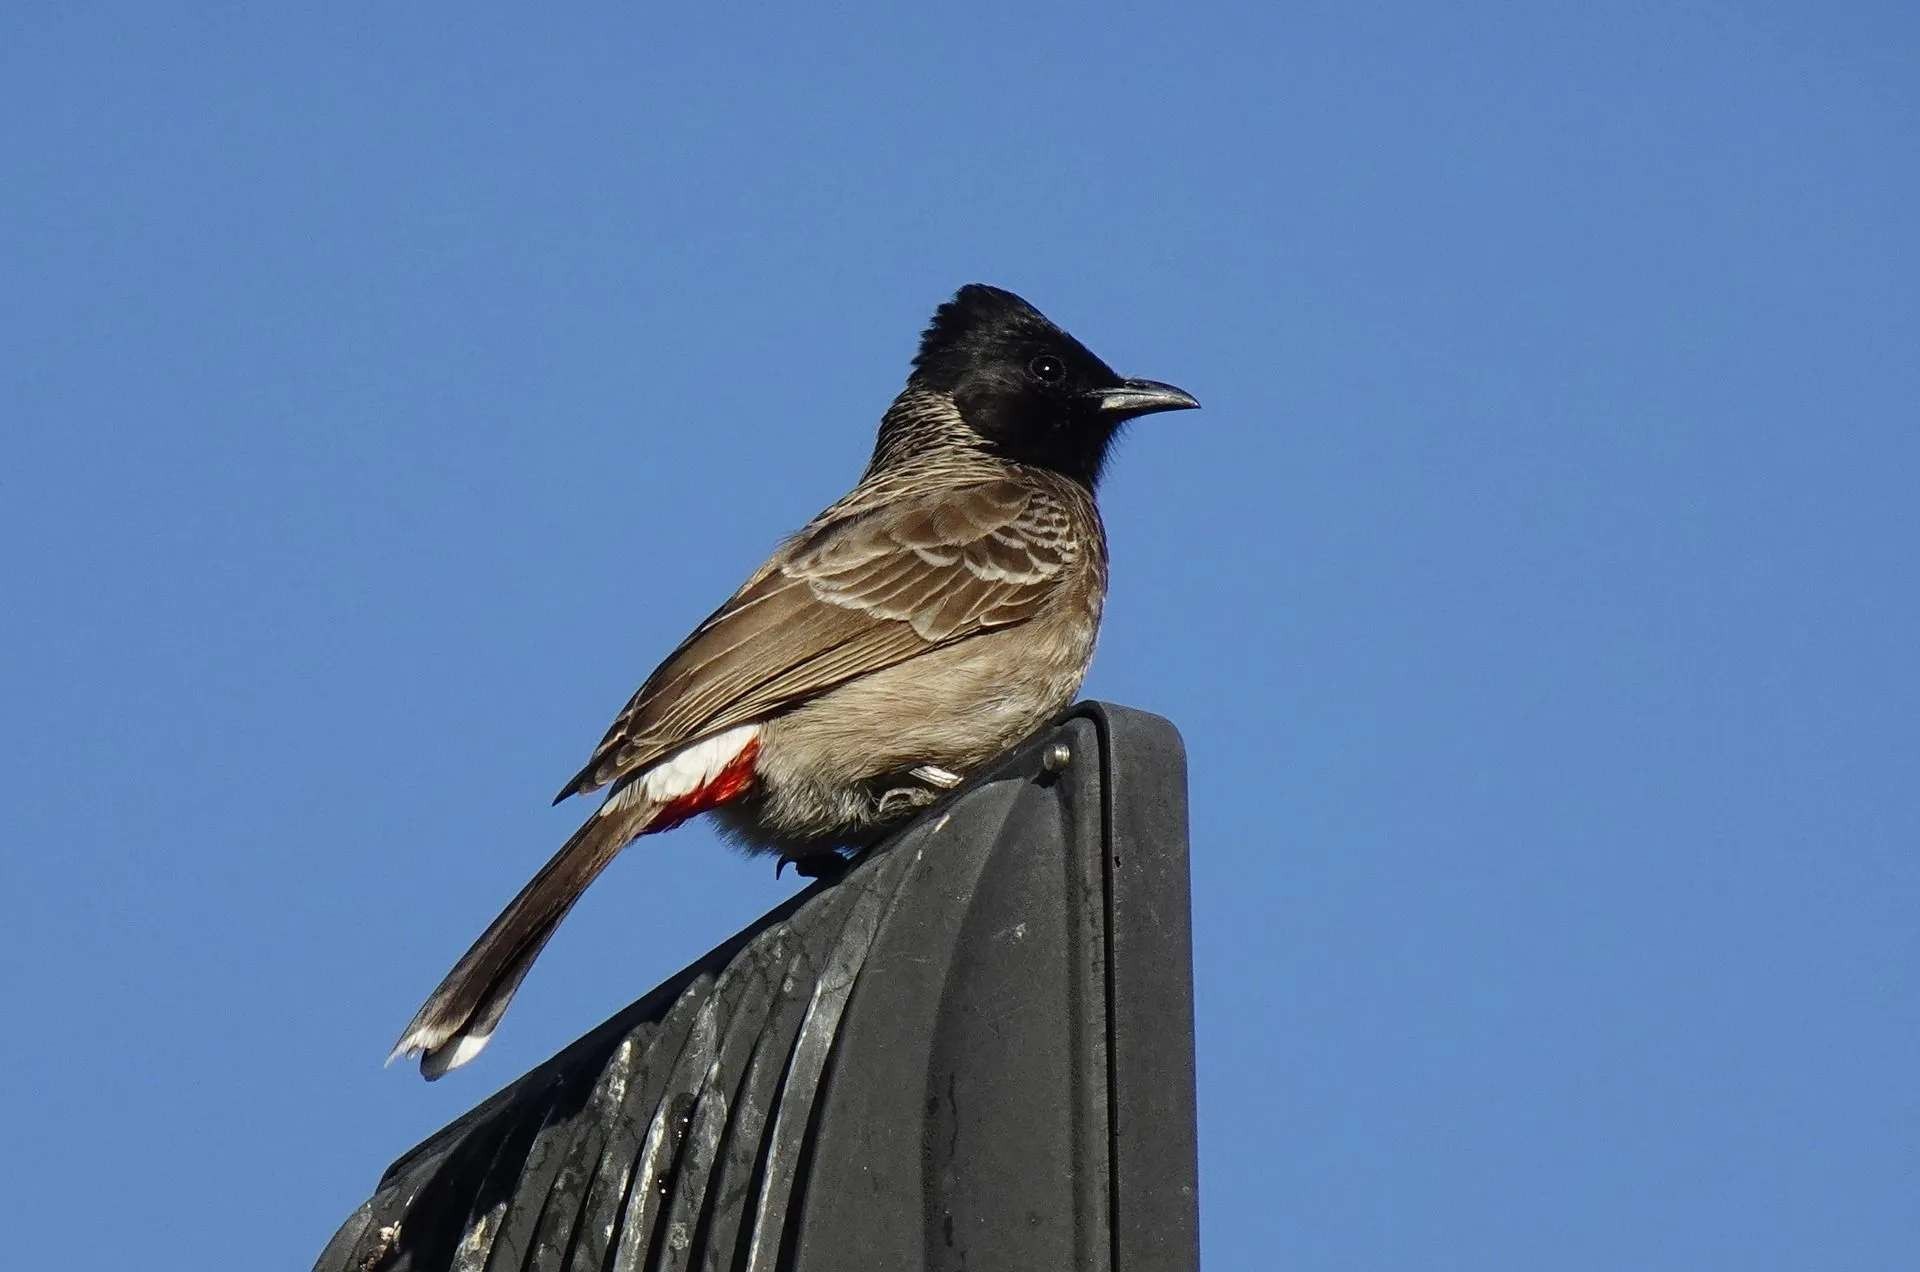 A Red-vented bulbul.